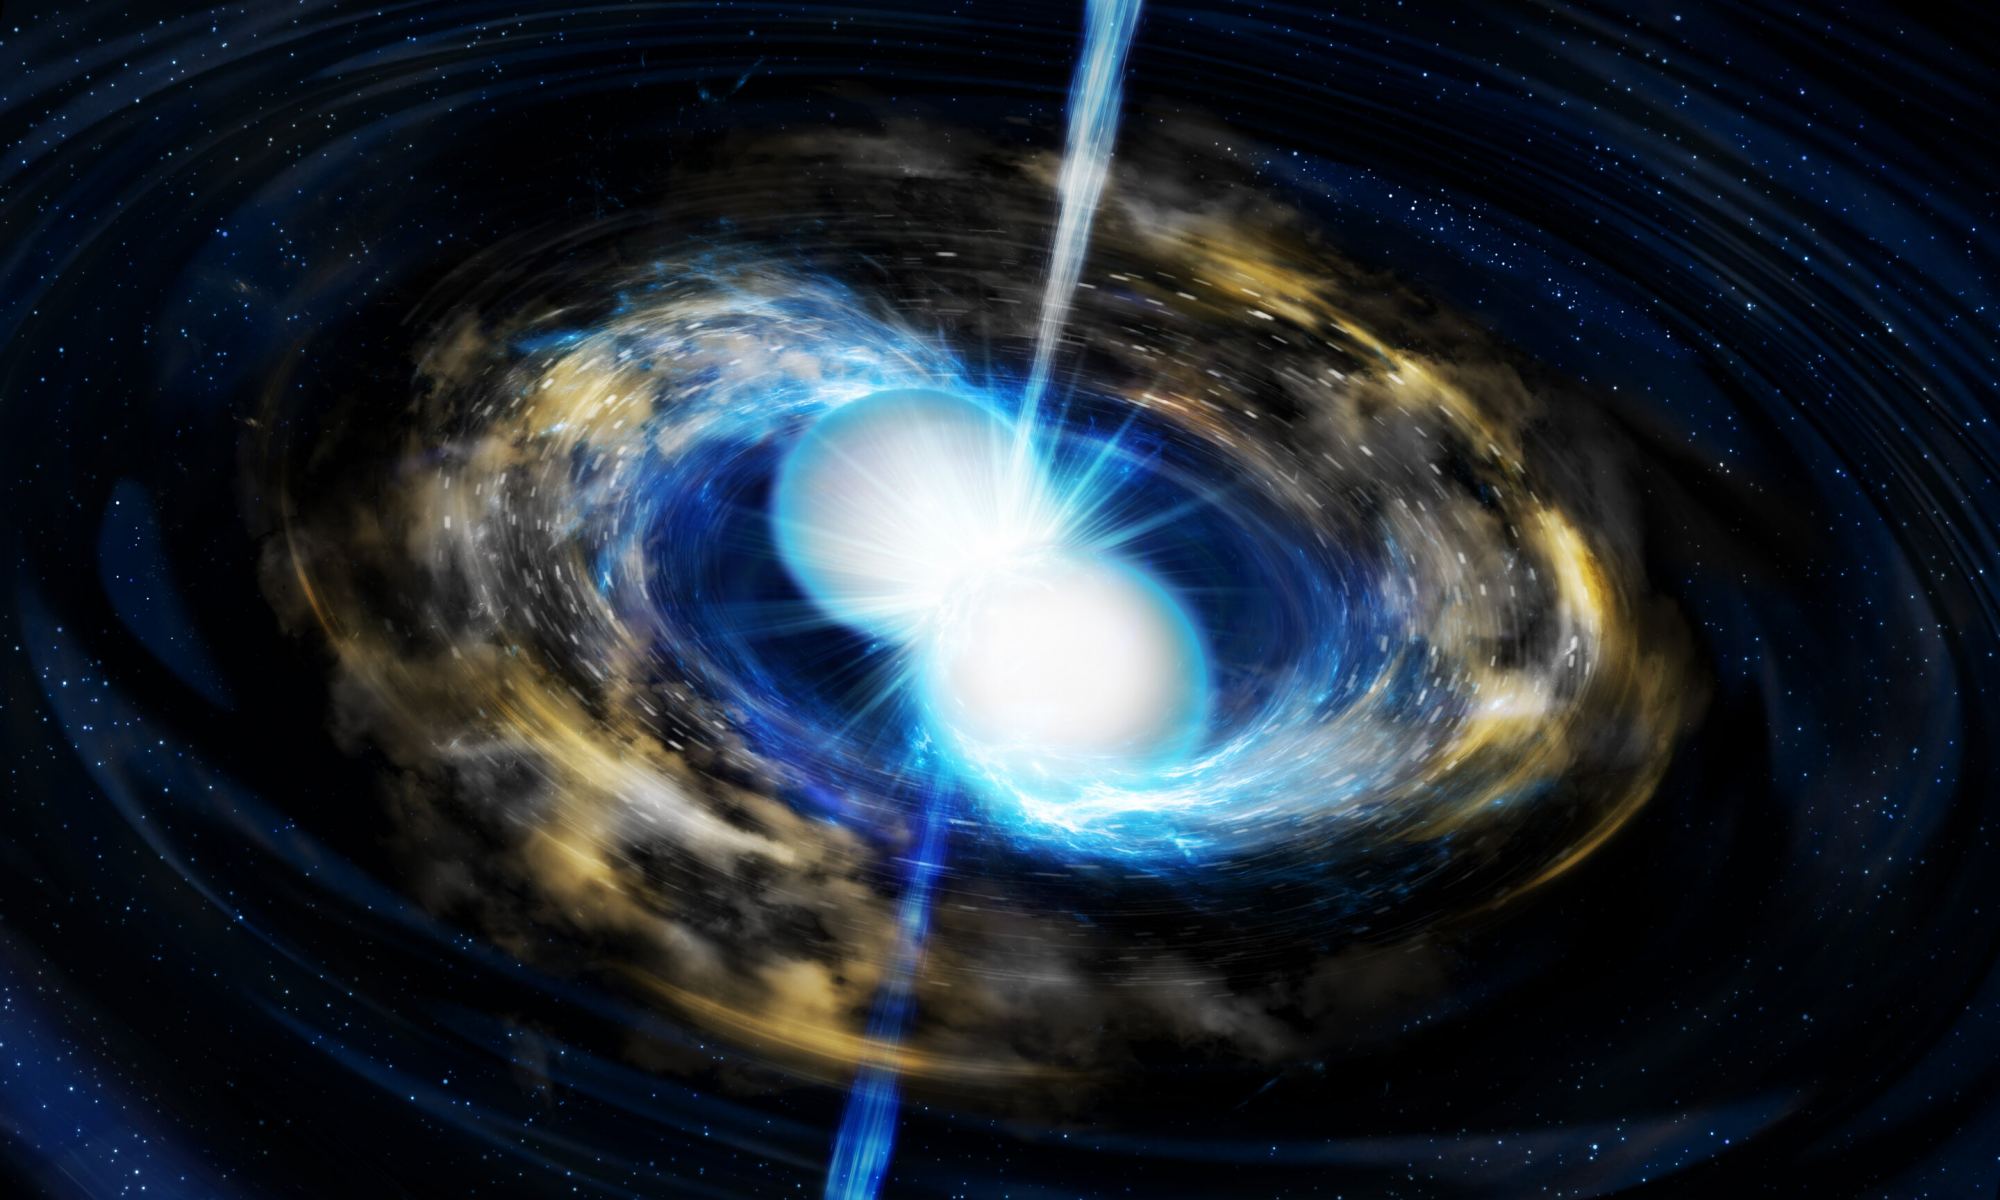 Artist’s conception of a neutron star merger. This process also creates heavy elements. Credit: Tohoku University